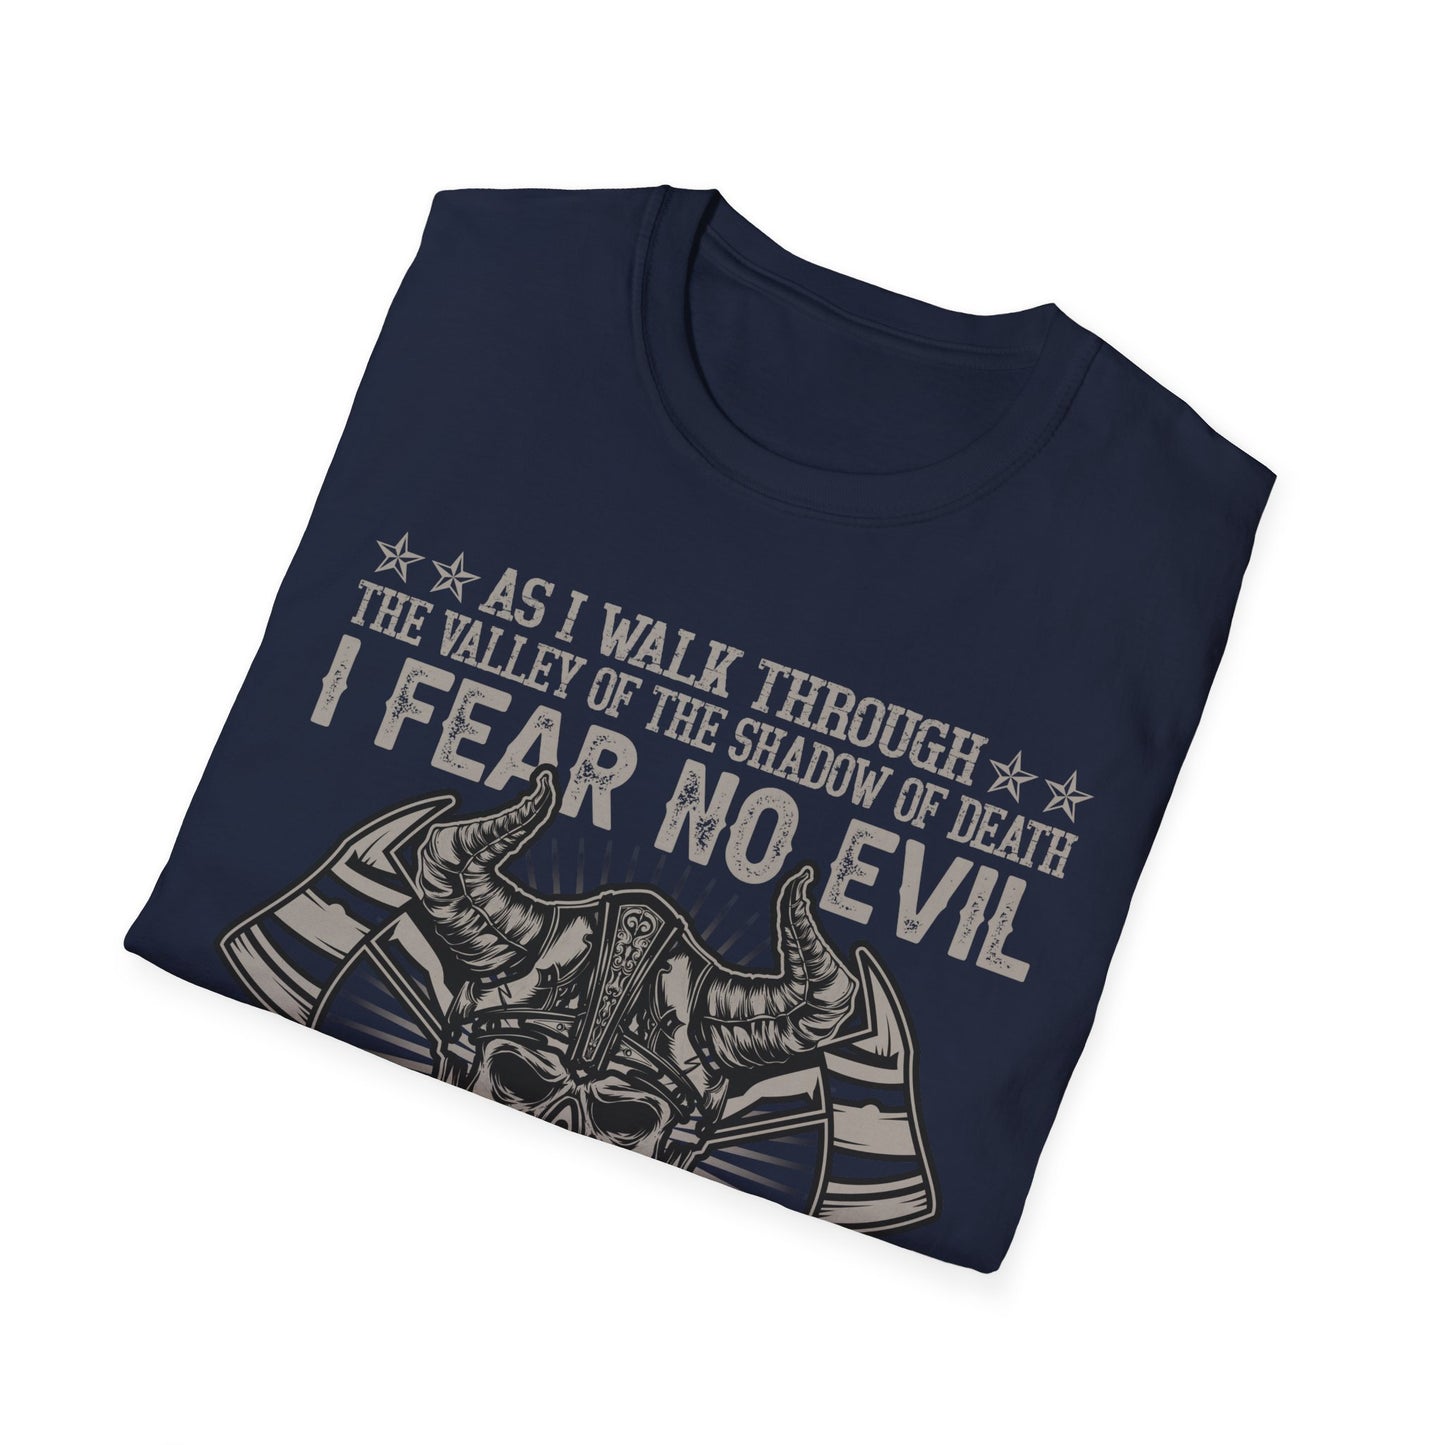 As I Walk Through The Valley Of The Shadow Of Death I Fear No Evil For I Am The Baddest One In The Valley Viking T-Shirt